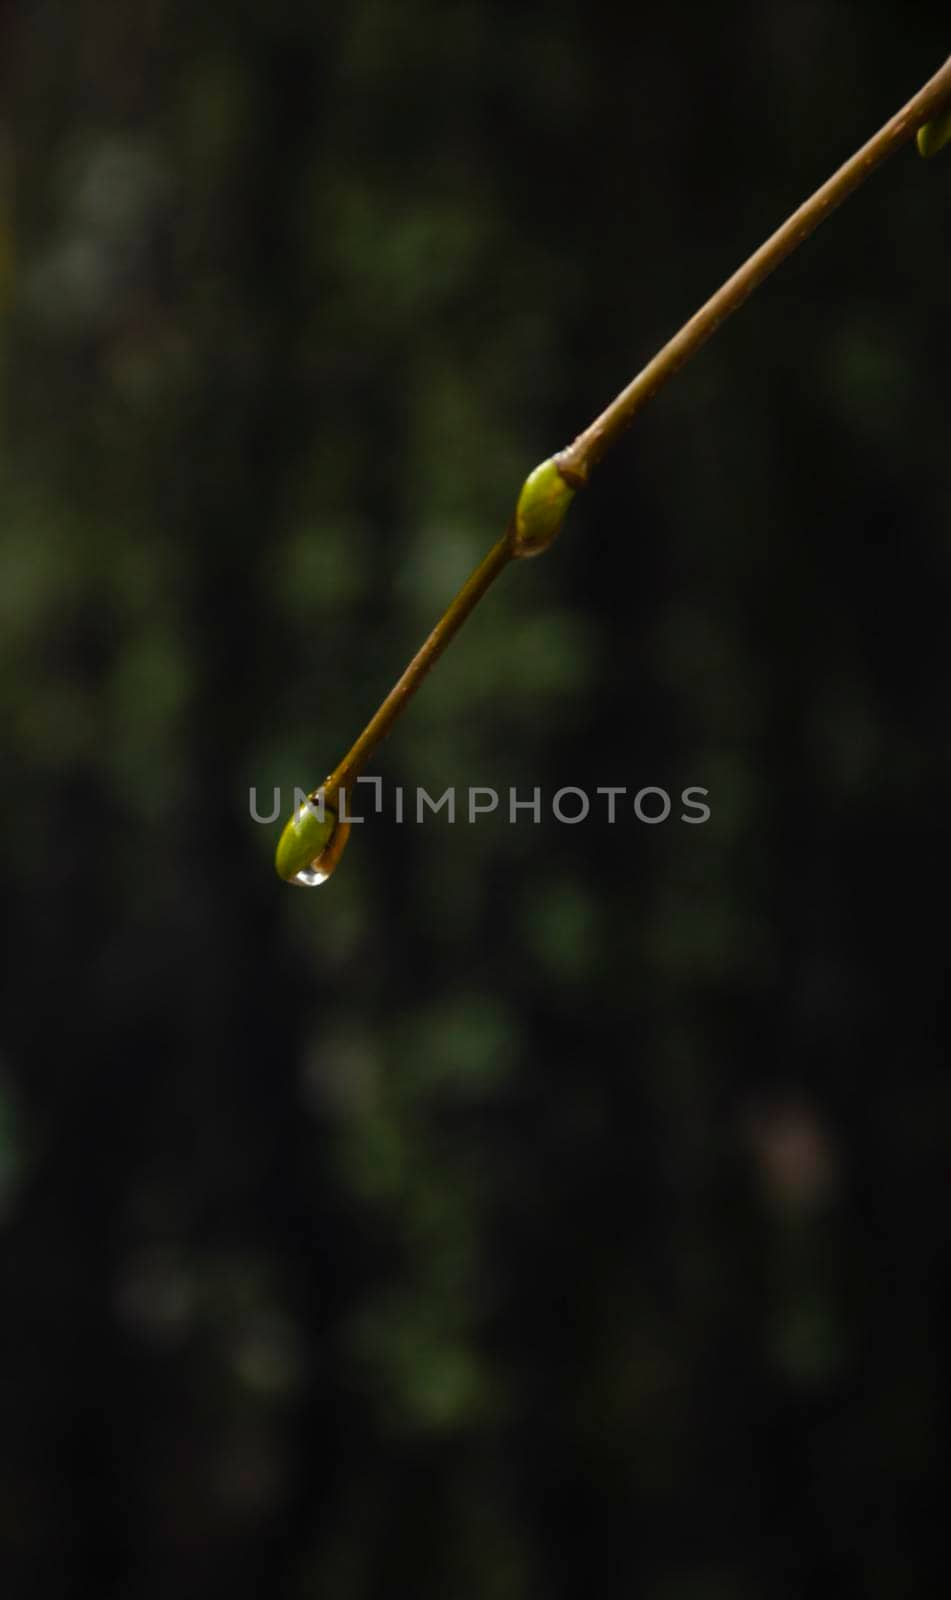 Raindrops on coniferous branches close-up. Soft focus, low key. Atmospheric natural photography.